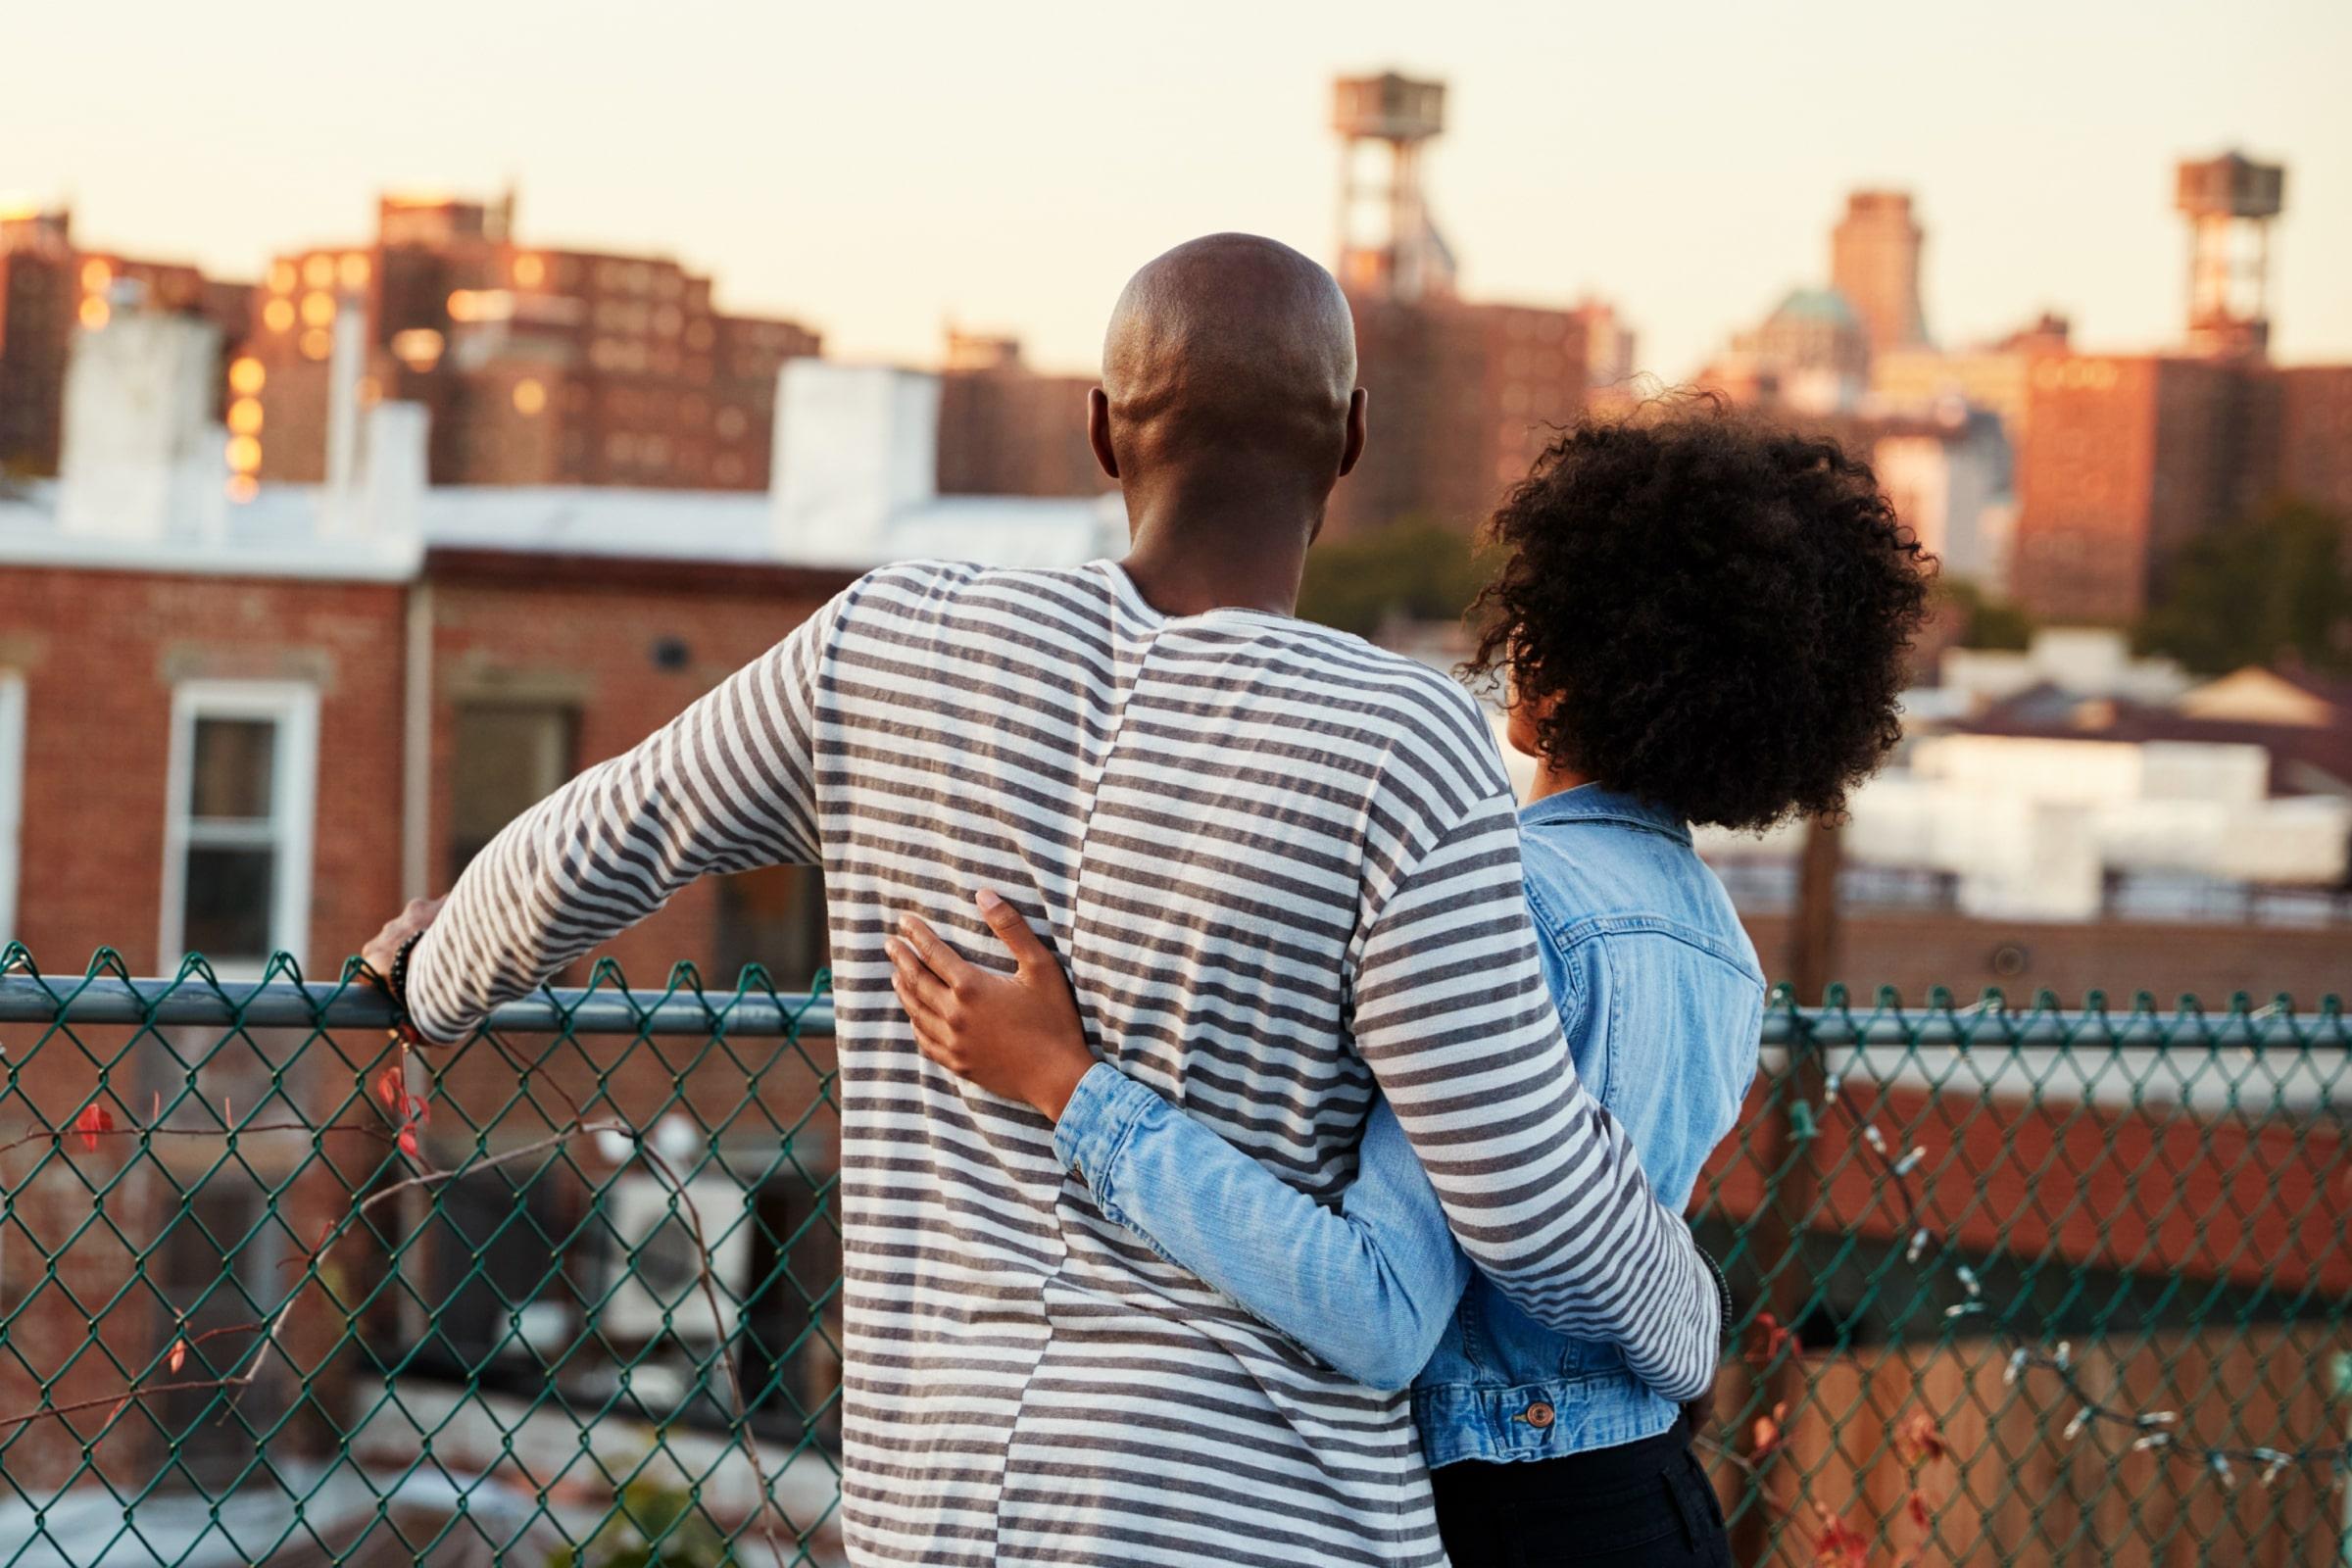 Our Favorite Rooftop Date Ideas